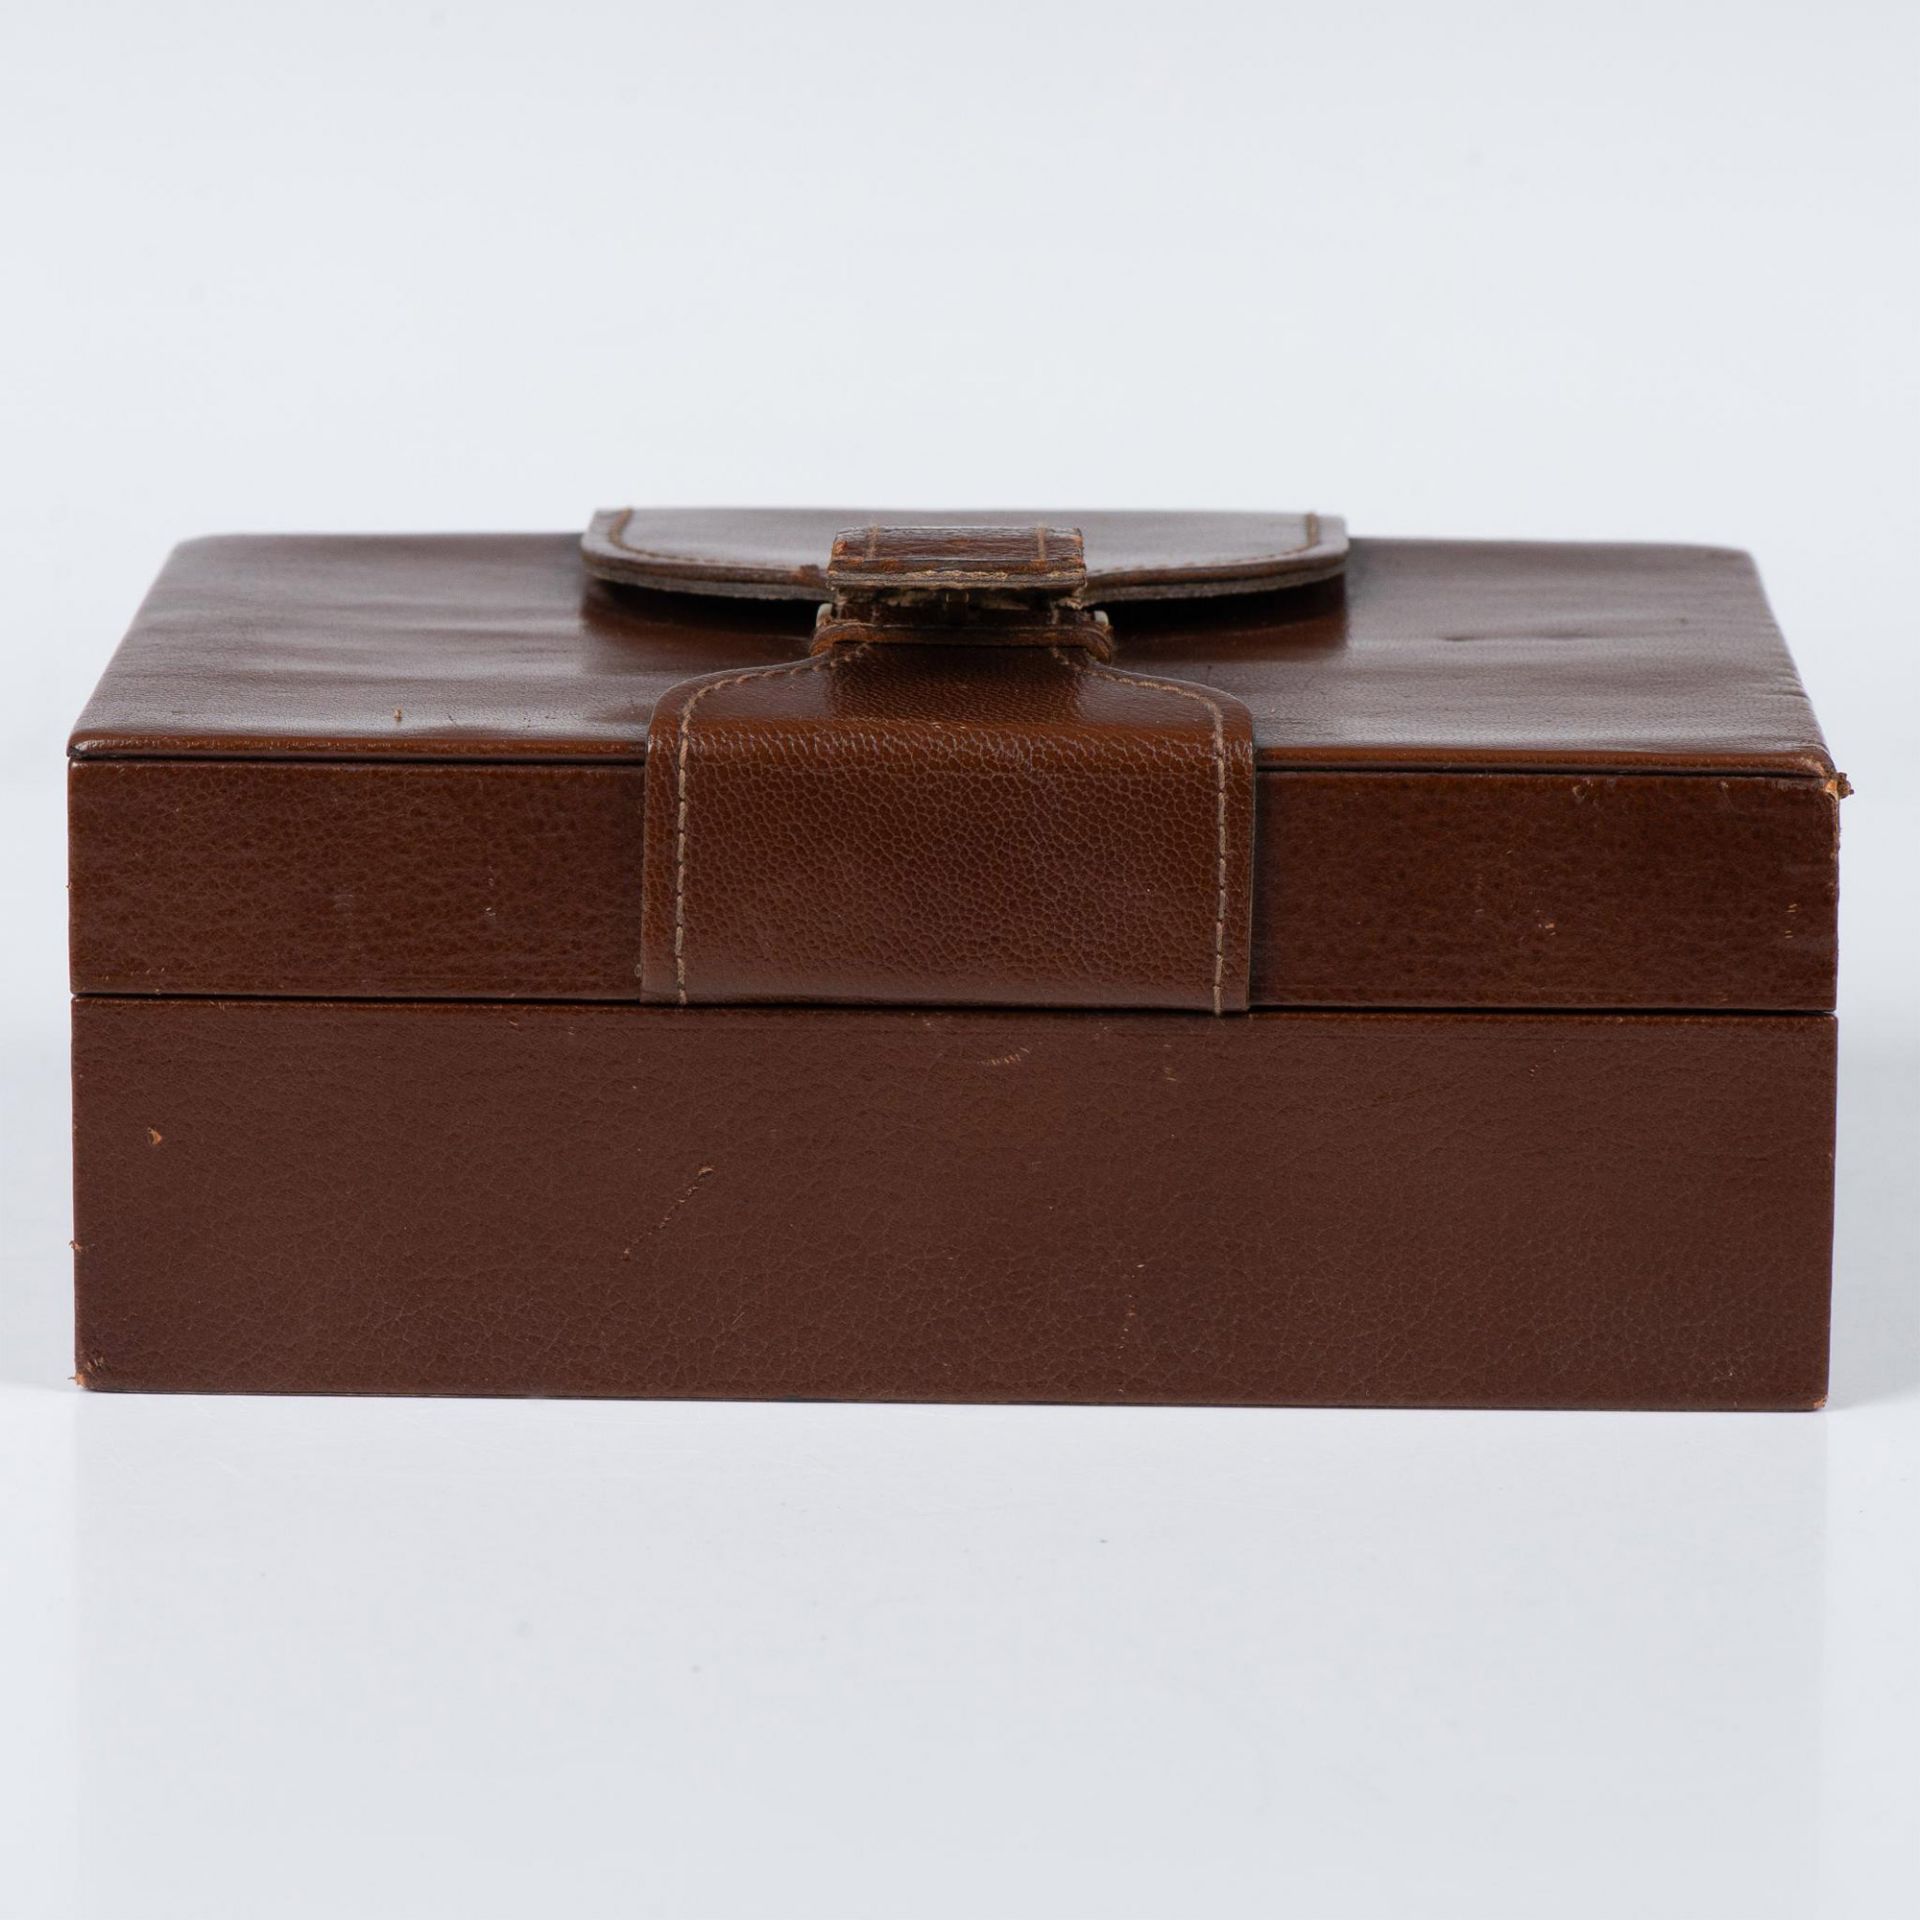 Vintage Rolex Box for Day Date President Watch - Image 2 of 7